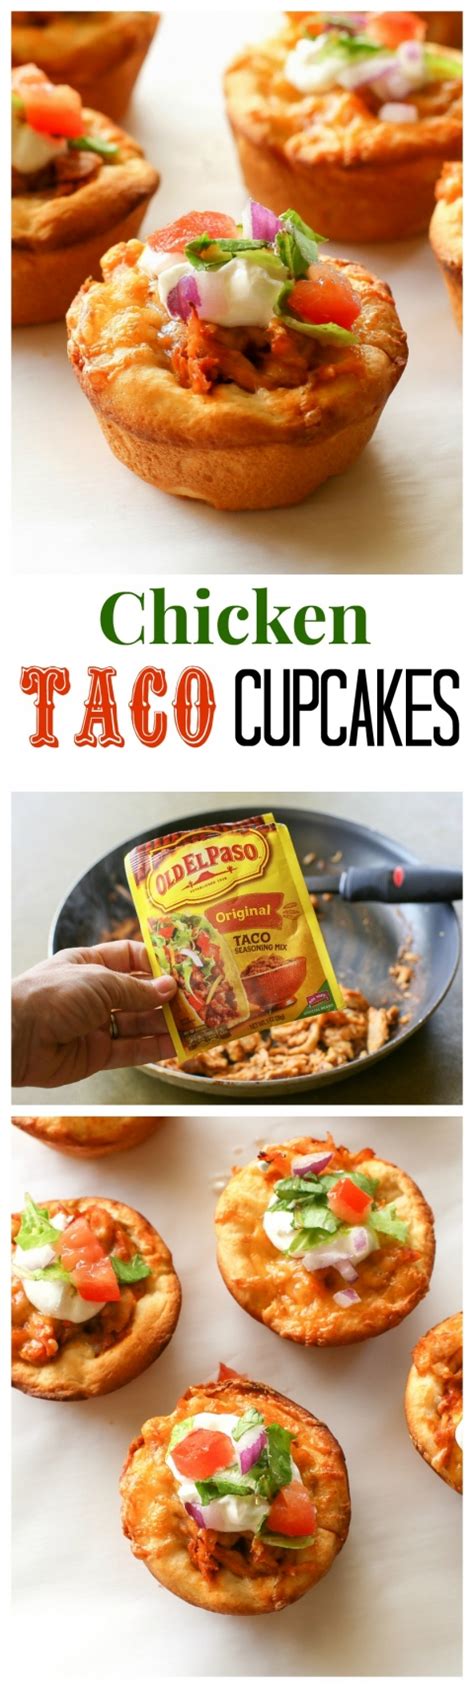 Chicken Taco Cupcakes The Girl Who Ate Everything Recipe Taco